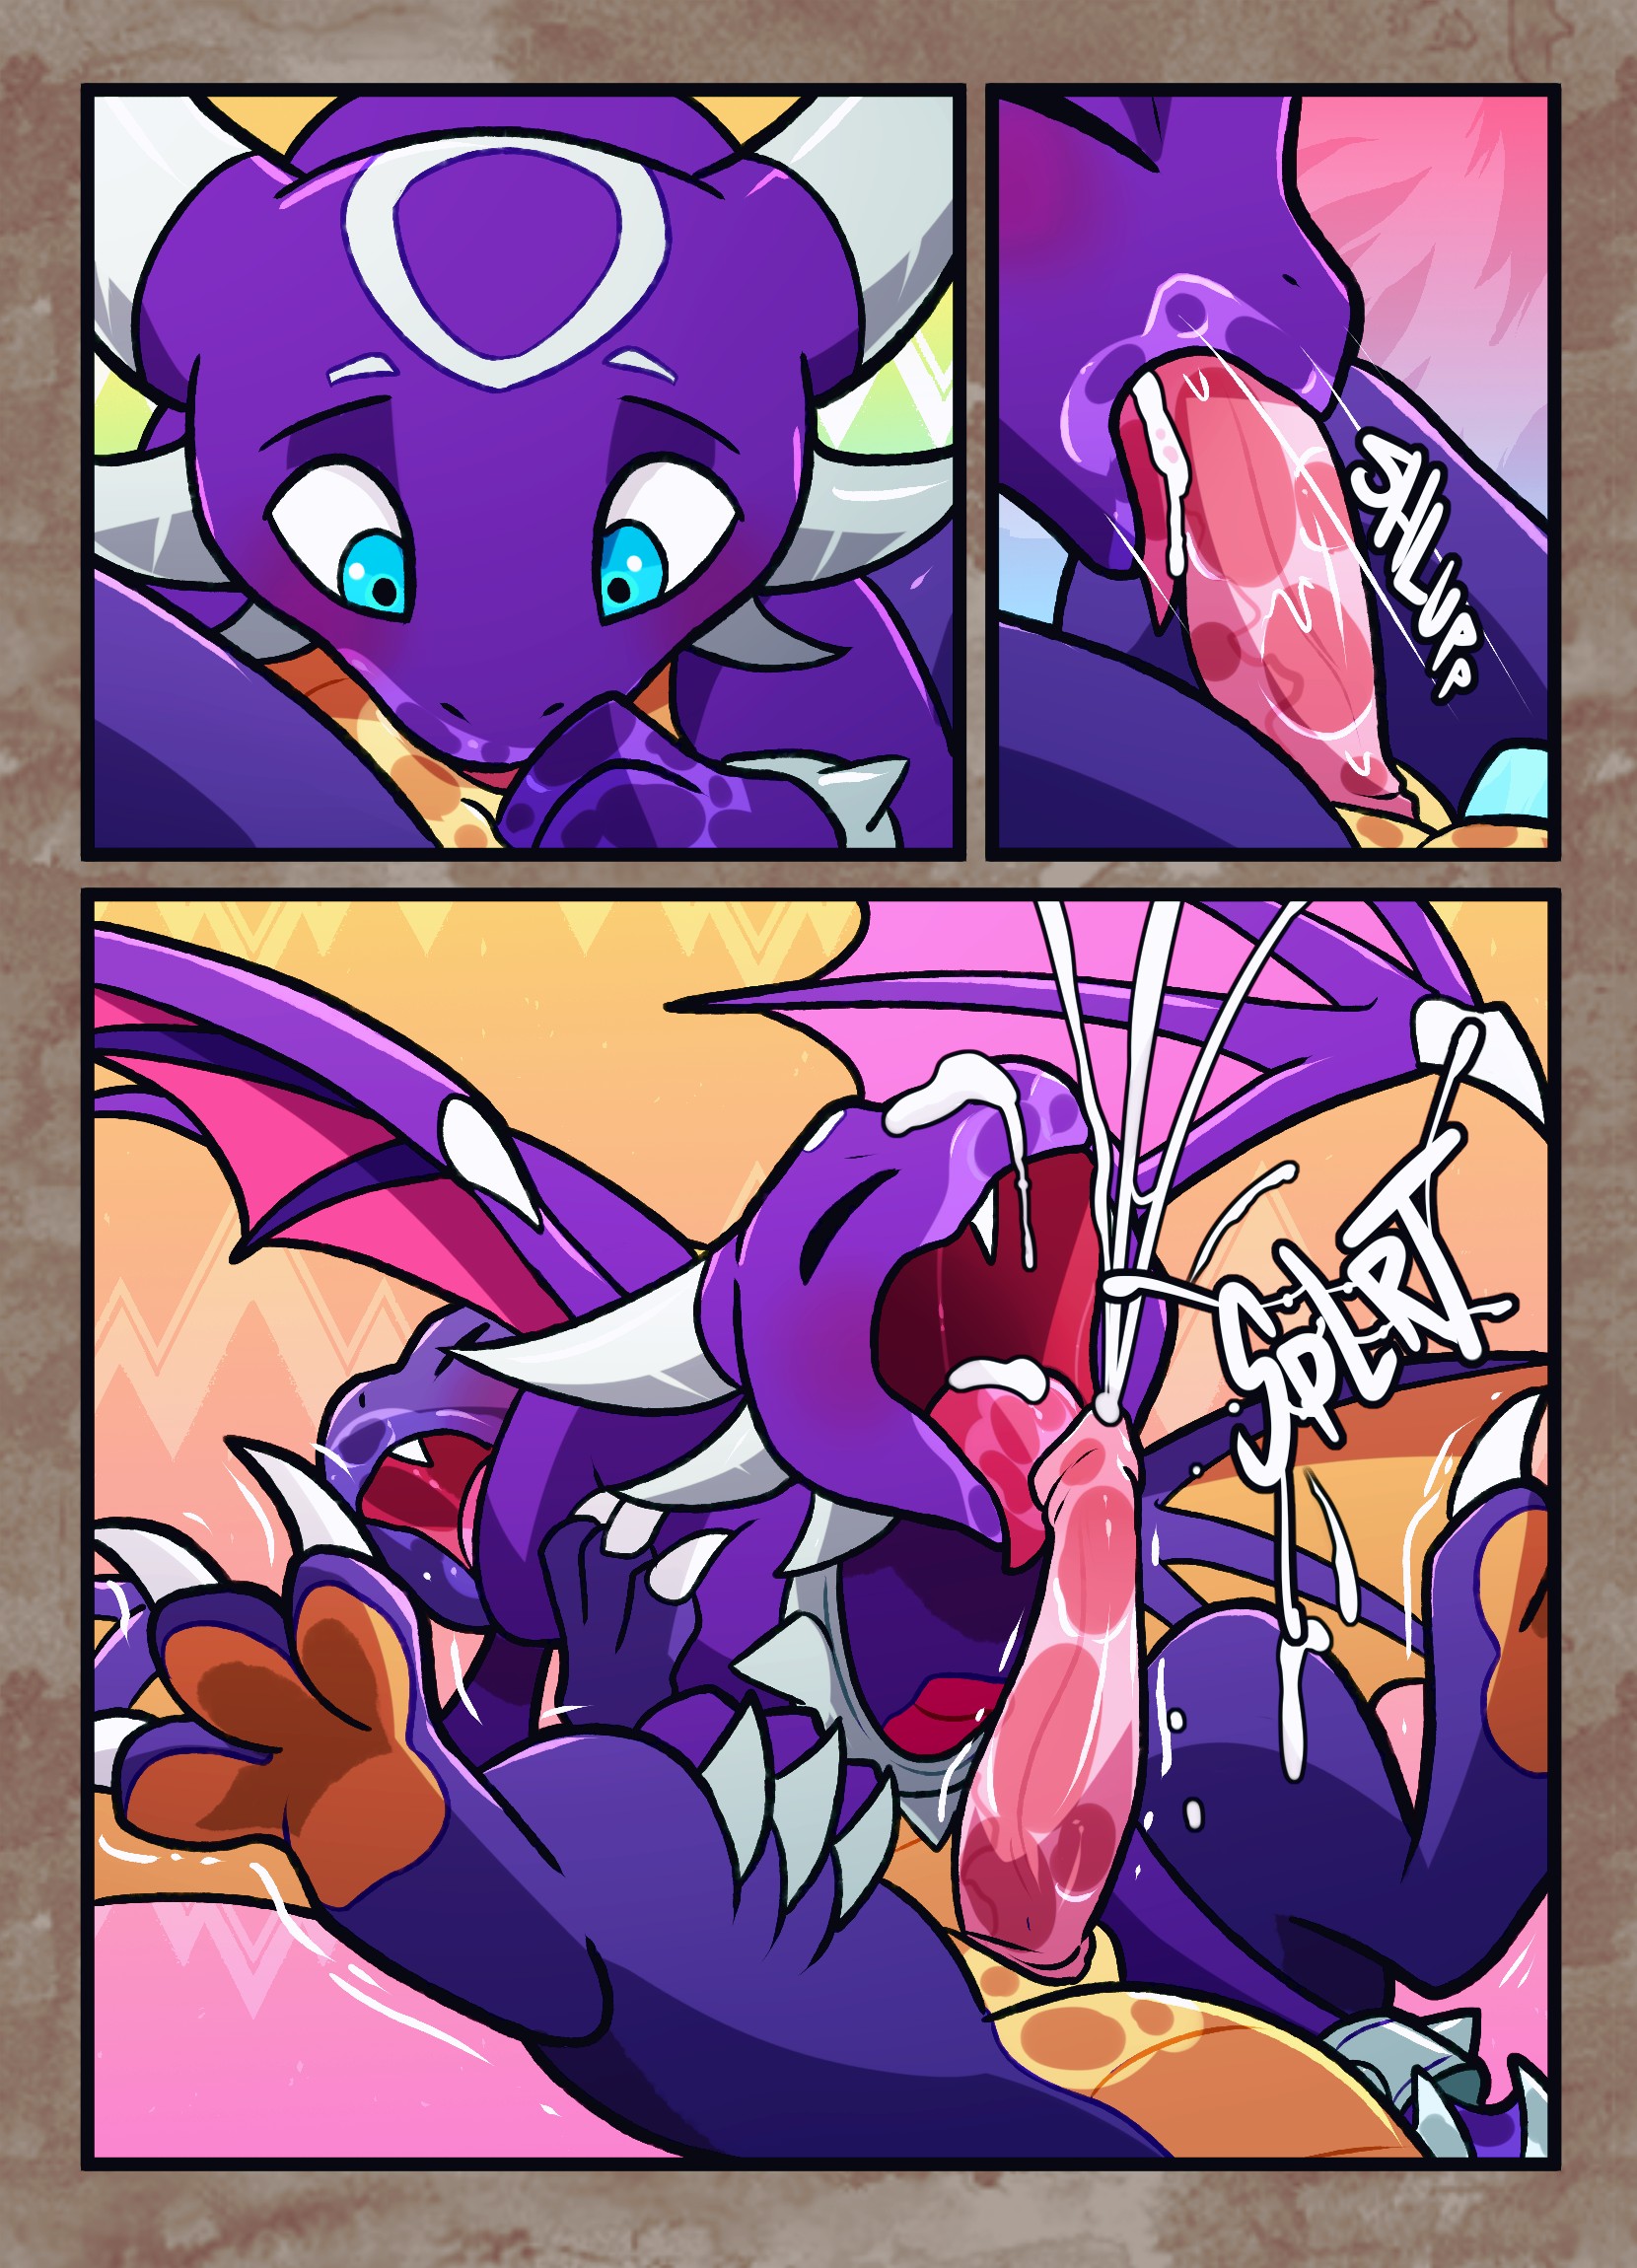 A Friend In Need porn comic page 011